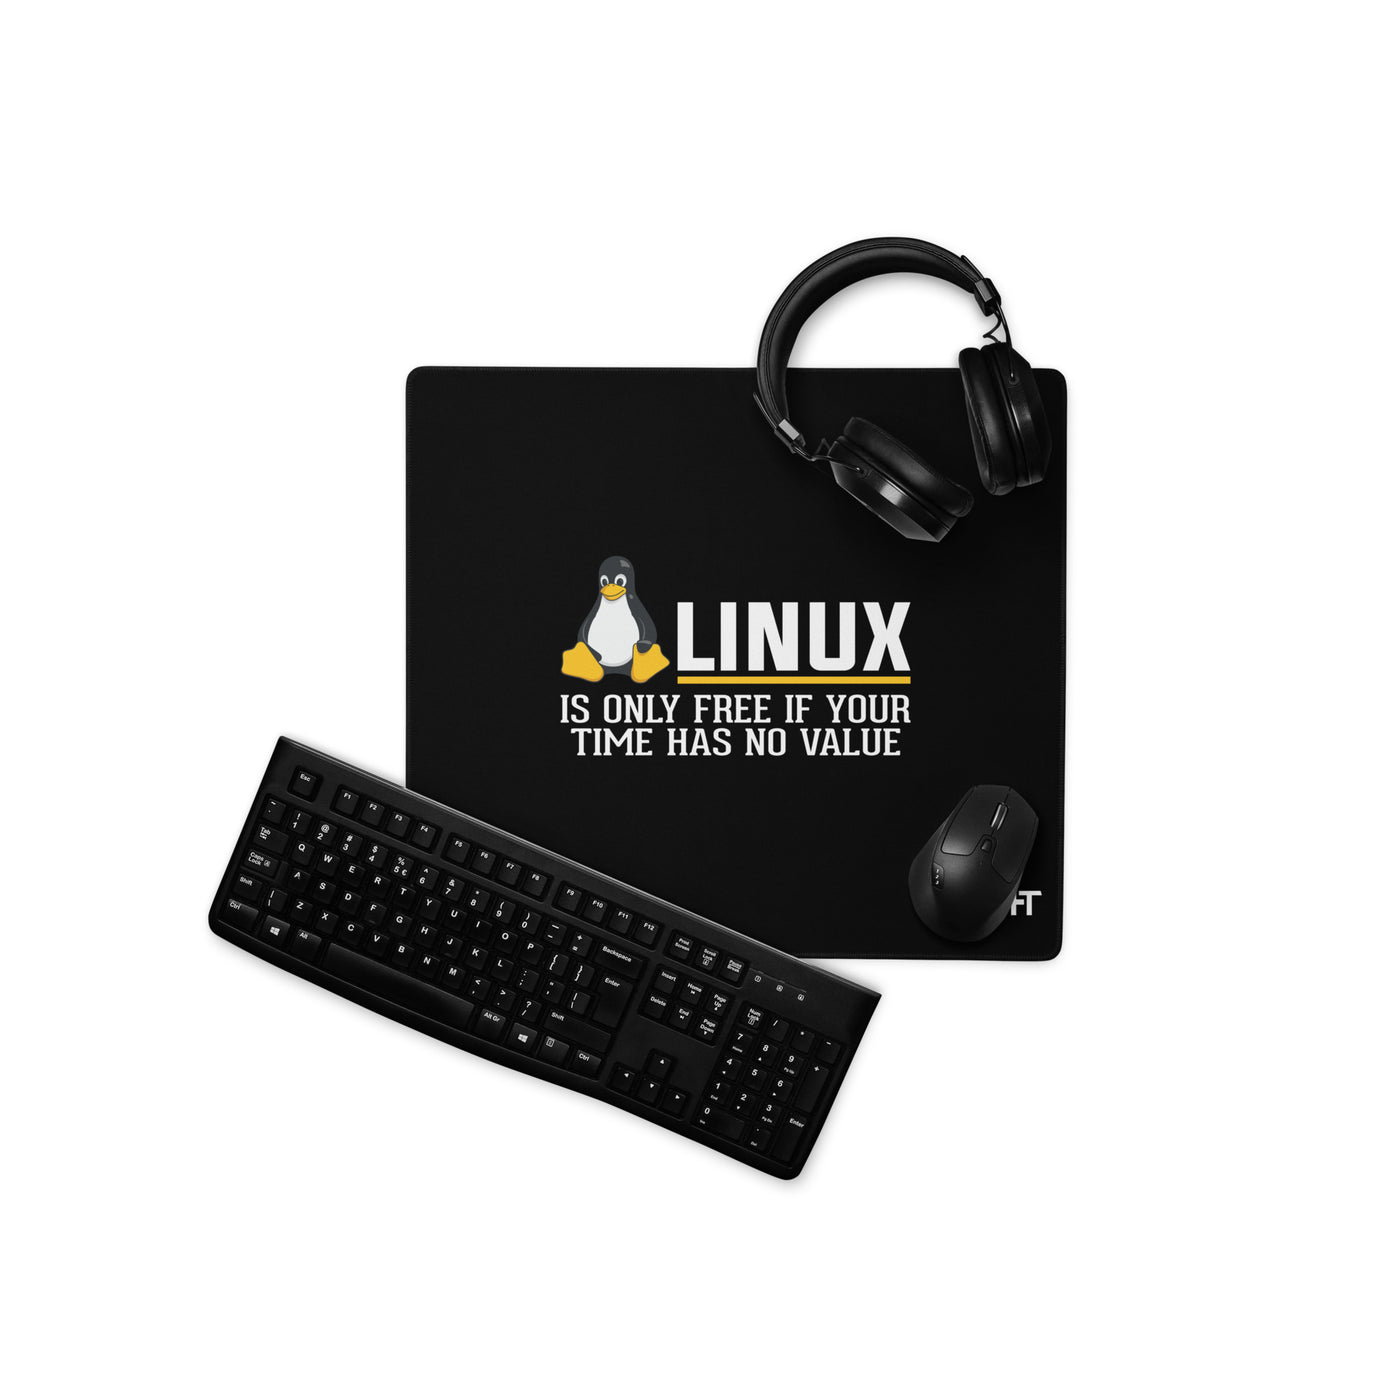 Linux is free only when your time has no value Desk Mat